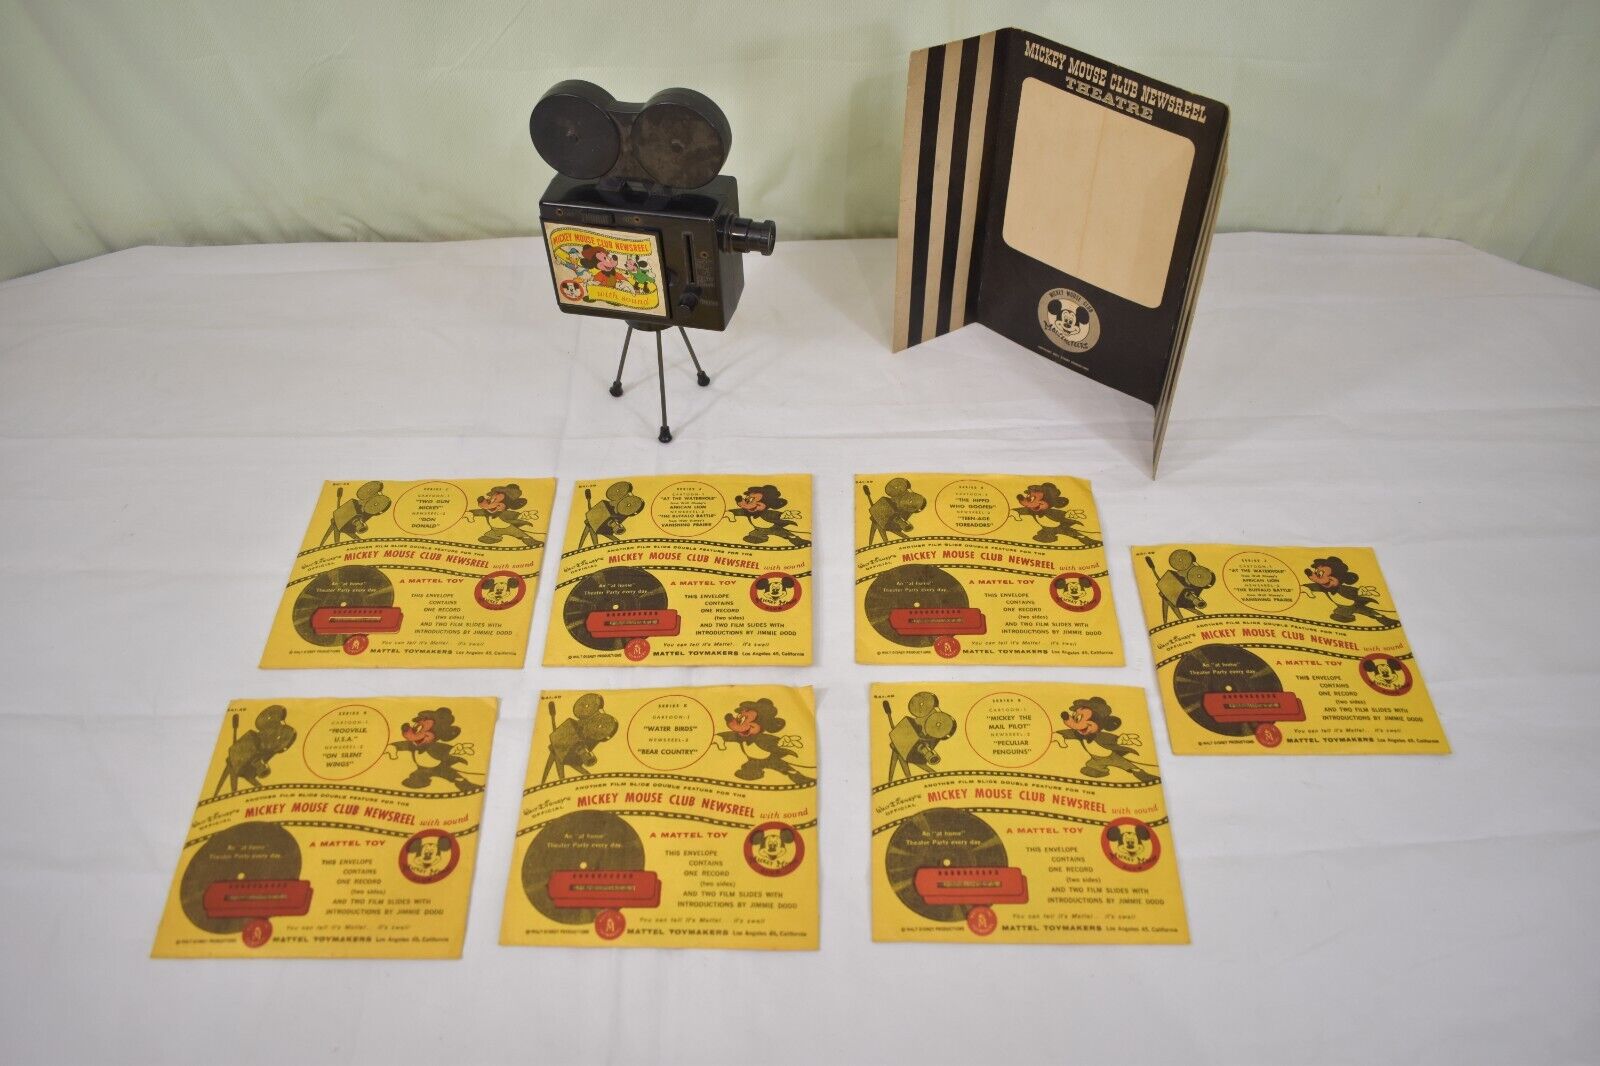 VINTAGE MATTEL MICKEY MOUSE CLUB NEWSREEL PROJECTOR 7 RECORDS 13 SLIDES